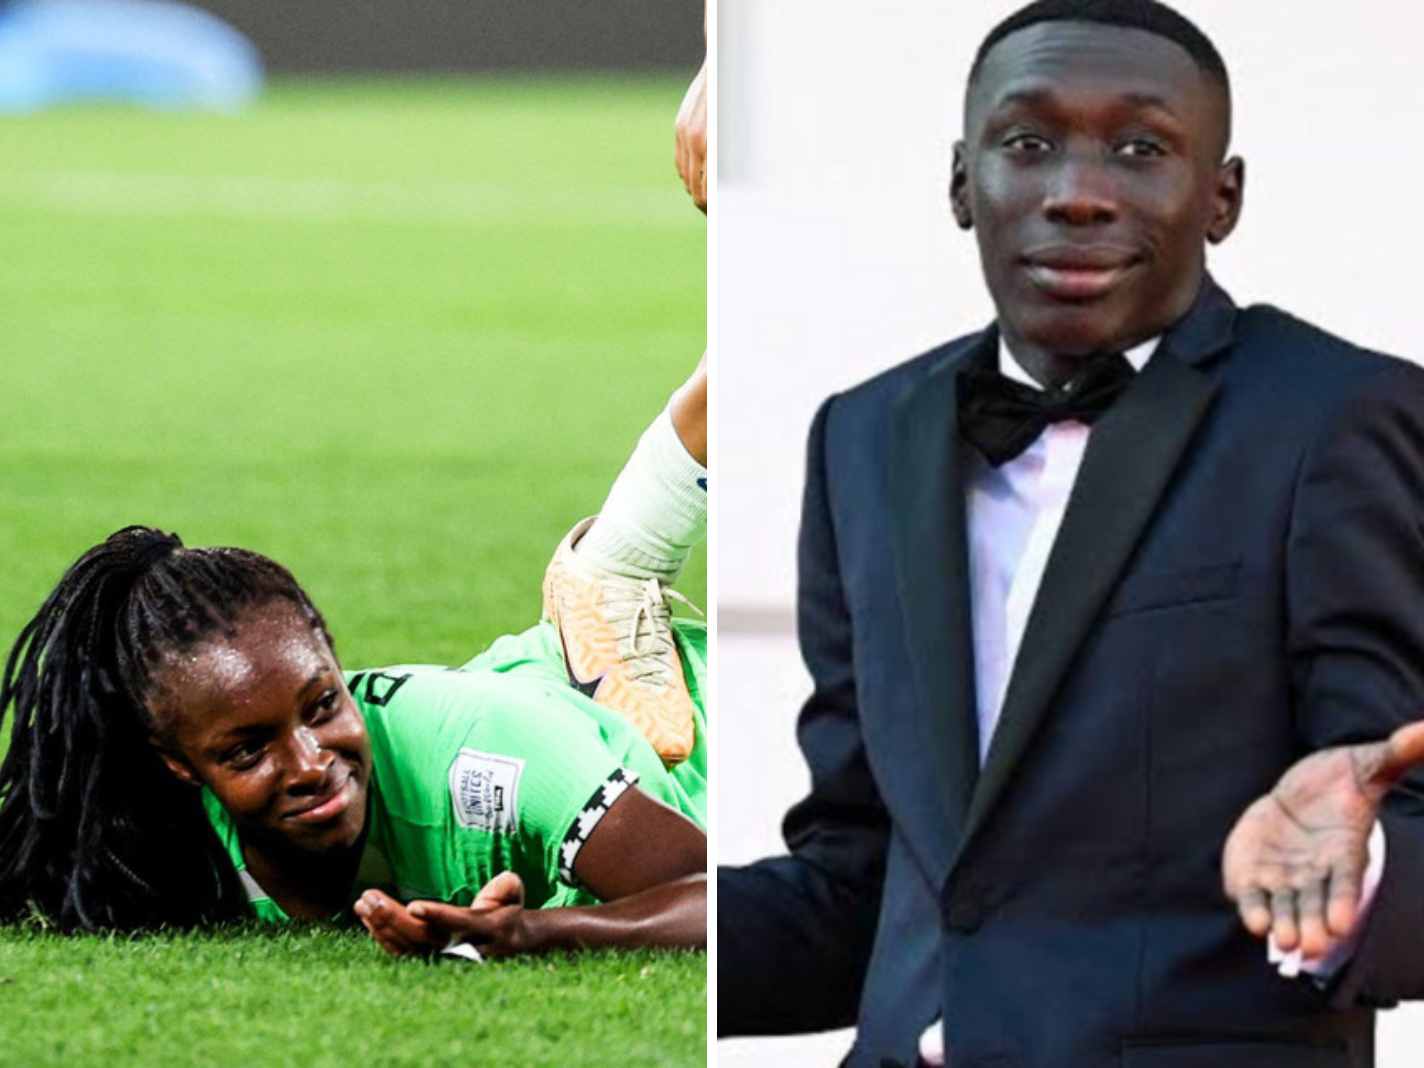 She Did the Khaby Lame – Nigerian Player Goes Viral For Her Reaction to Getting Stamped by Lauren James